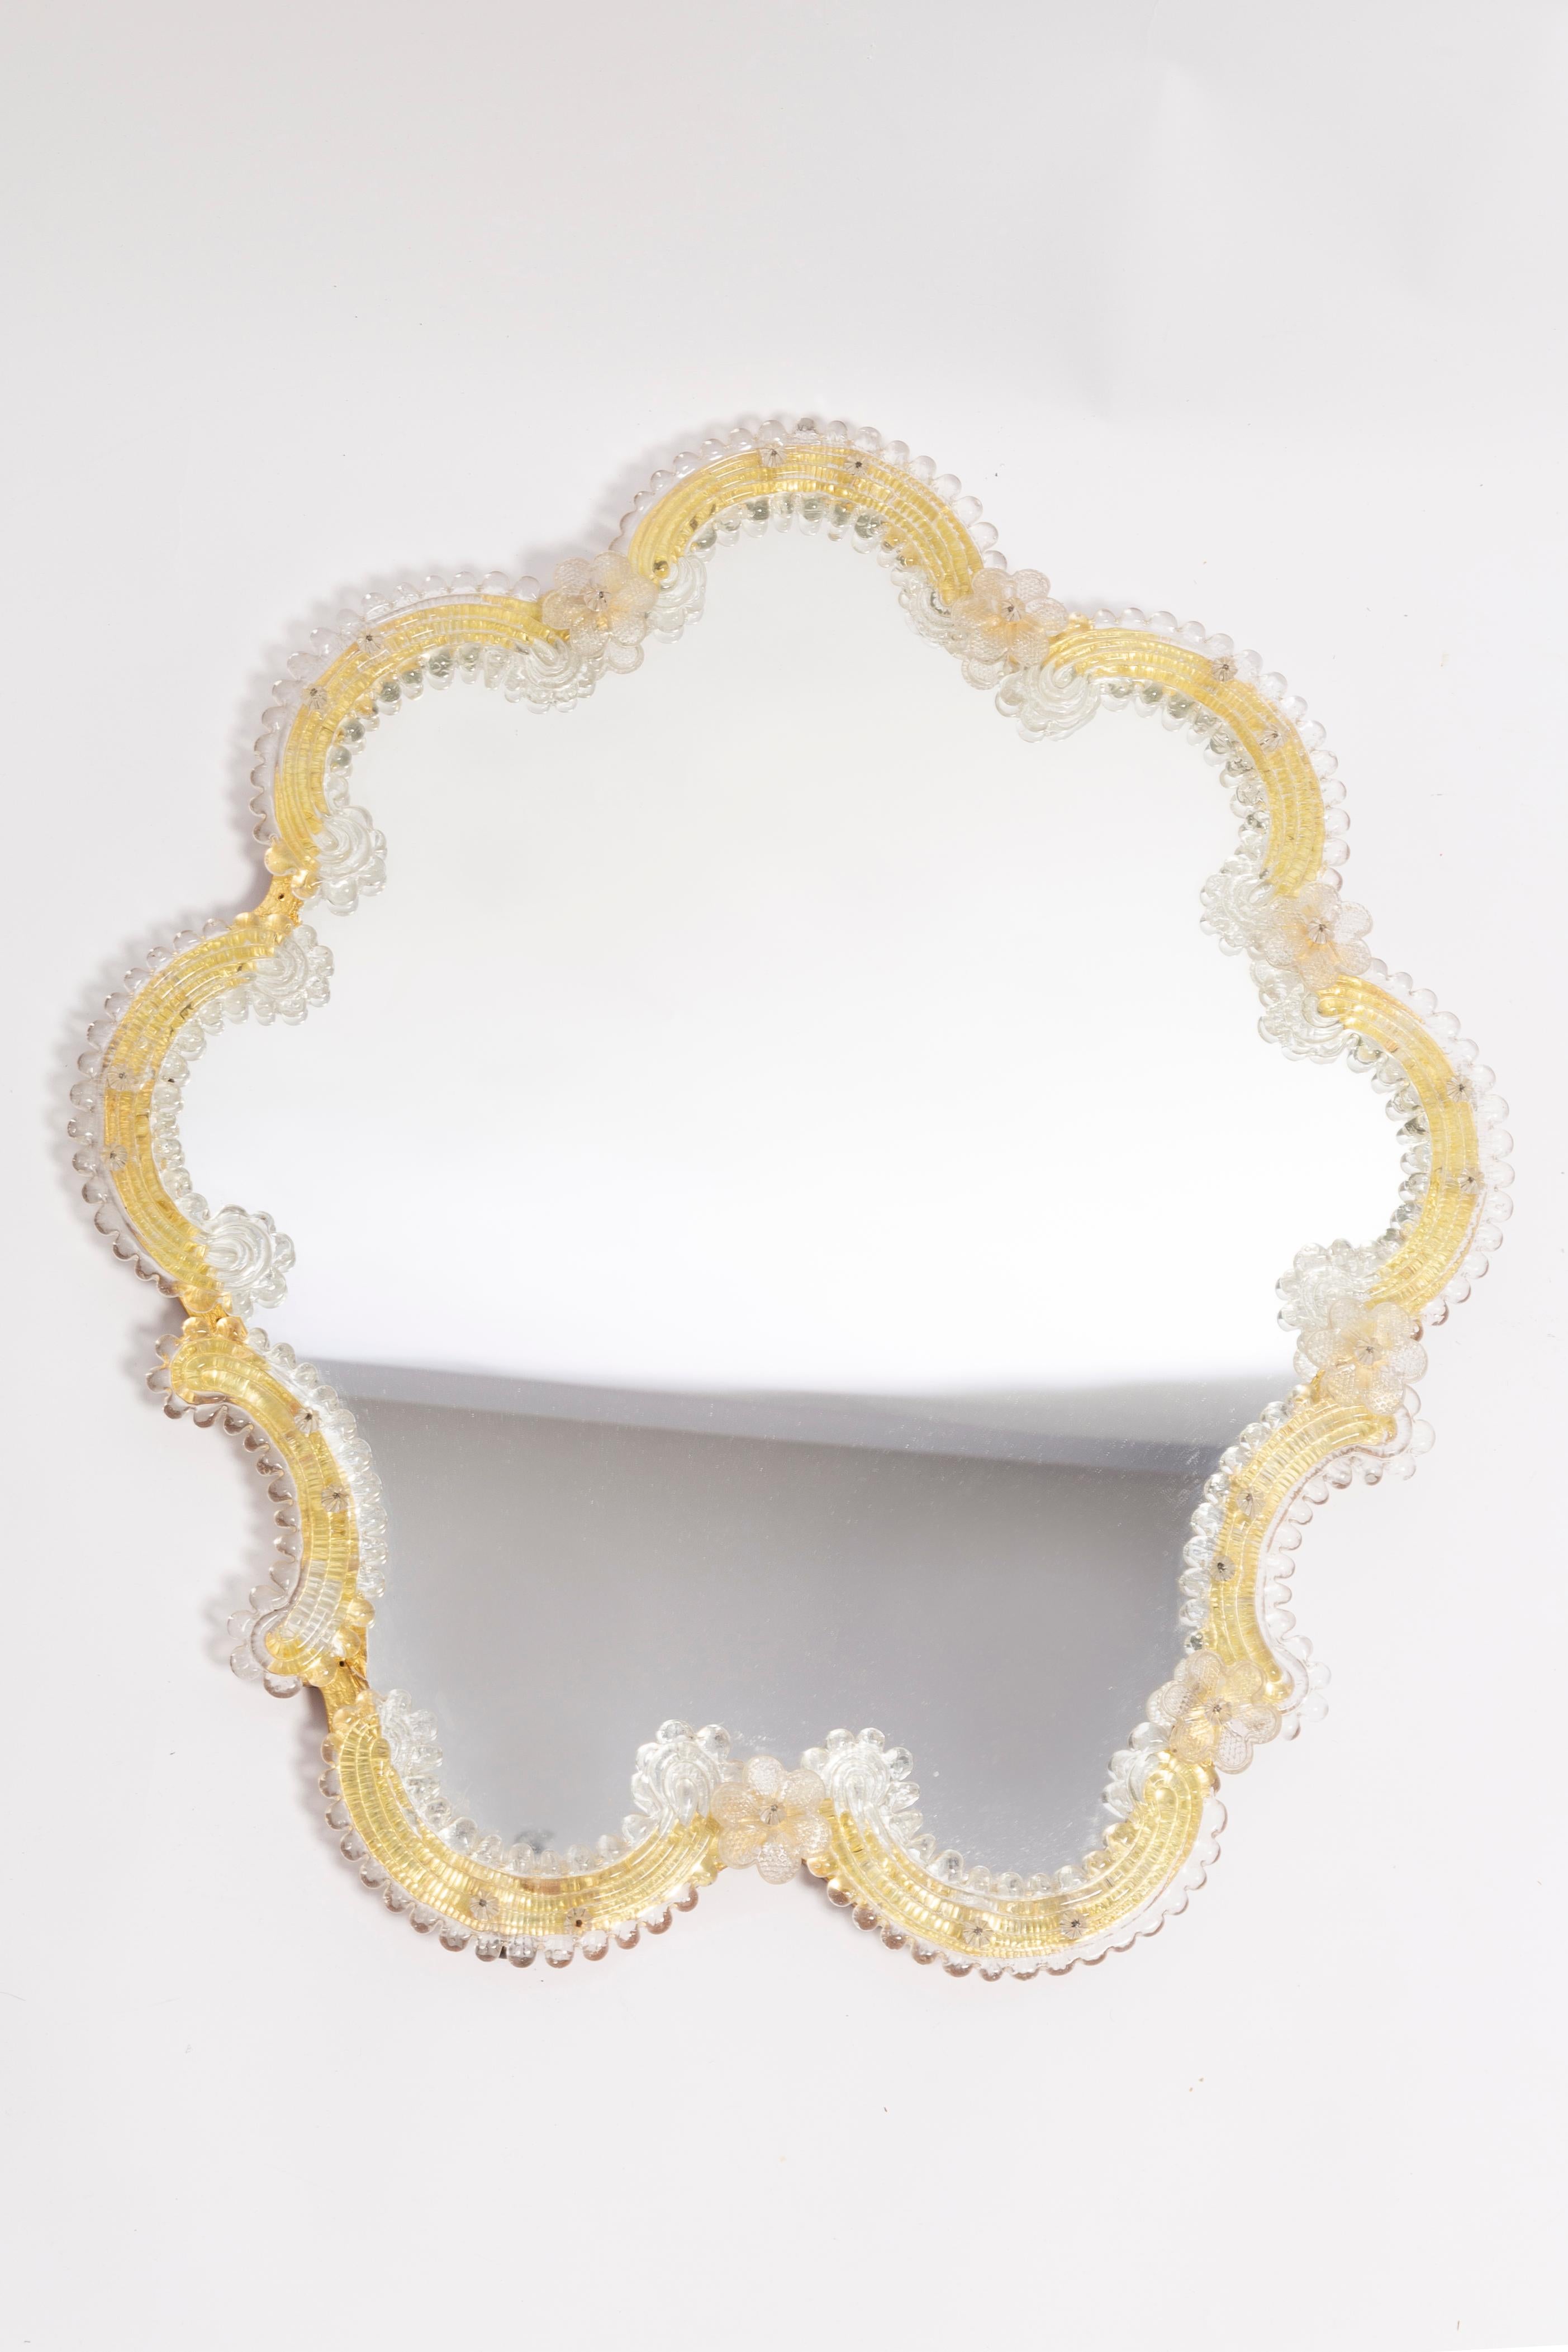 Mid-Century Modern Mid-Century Decorative Mirror in Flower Frame, Italy, 1960s For Sale